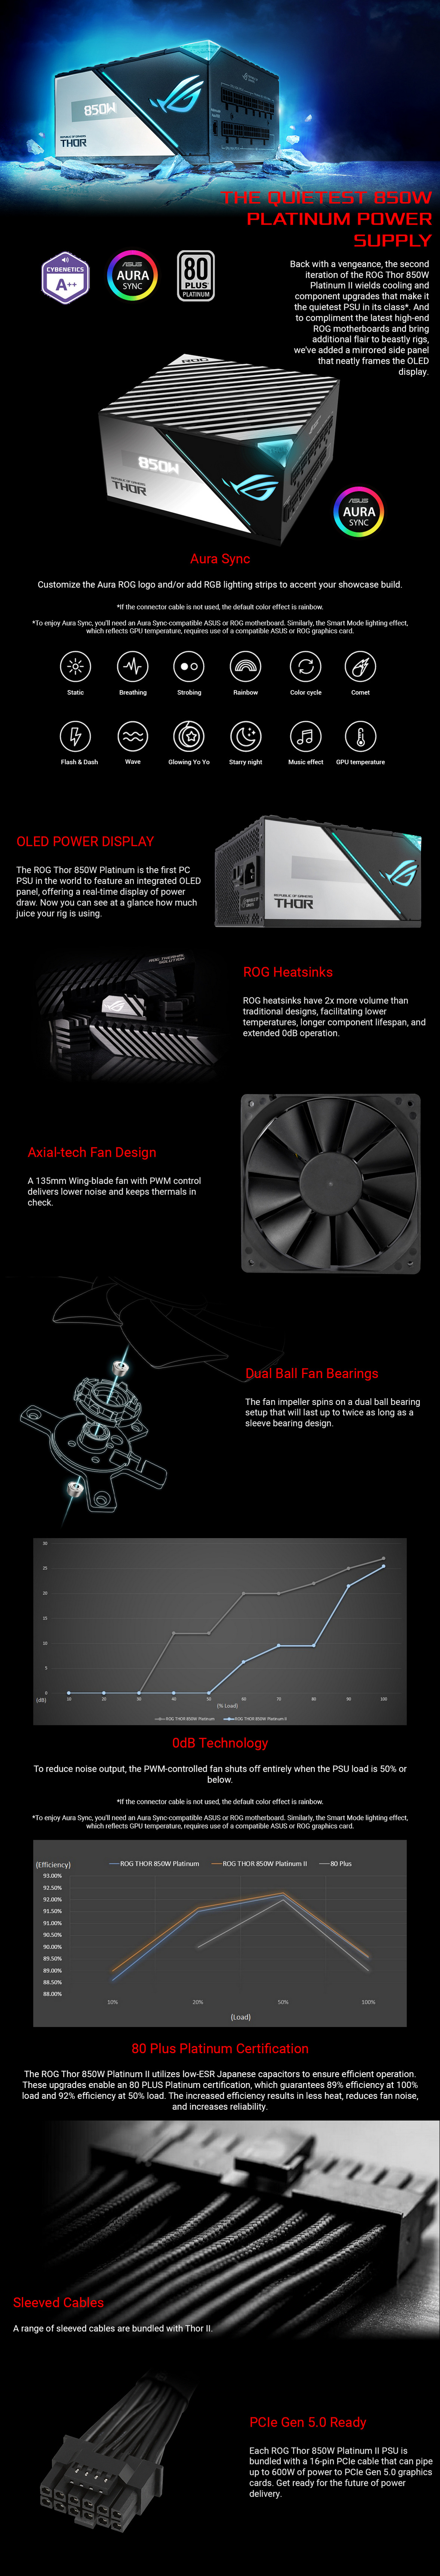 A large marketing image providing additional information about the product ASUS ROG Thor II 850W Platinum ATX Modular PSU - Additional alt info not provided